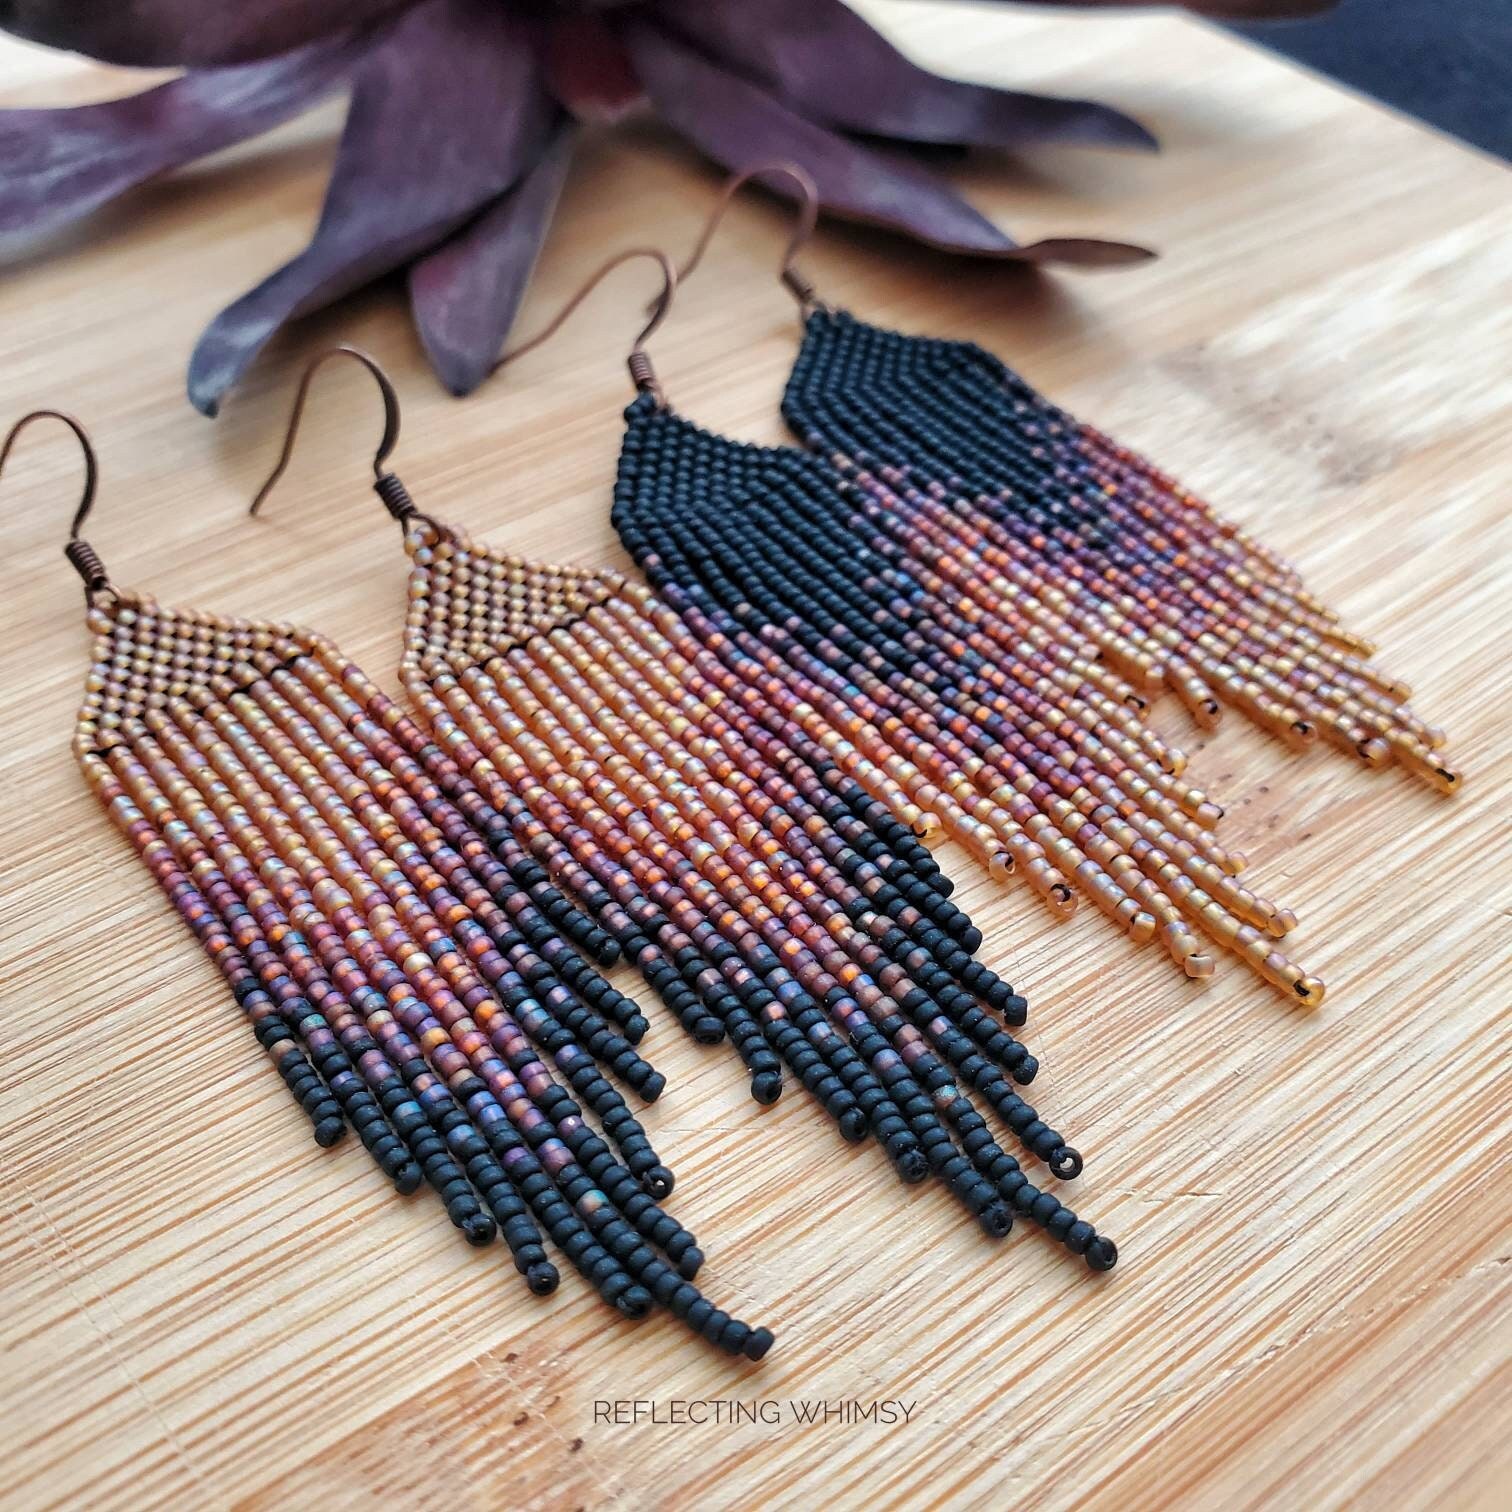 Designer Glass and Sequins Beaded Fringe as low as $10.85, buy Beaded Fringe  from our store at lowest prices guranteed .